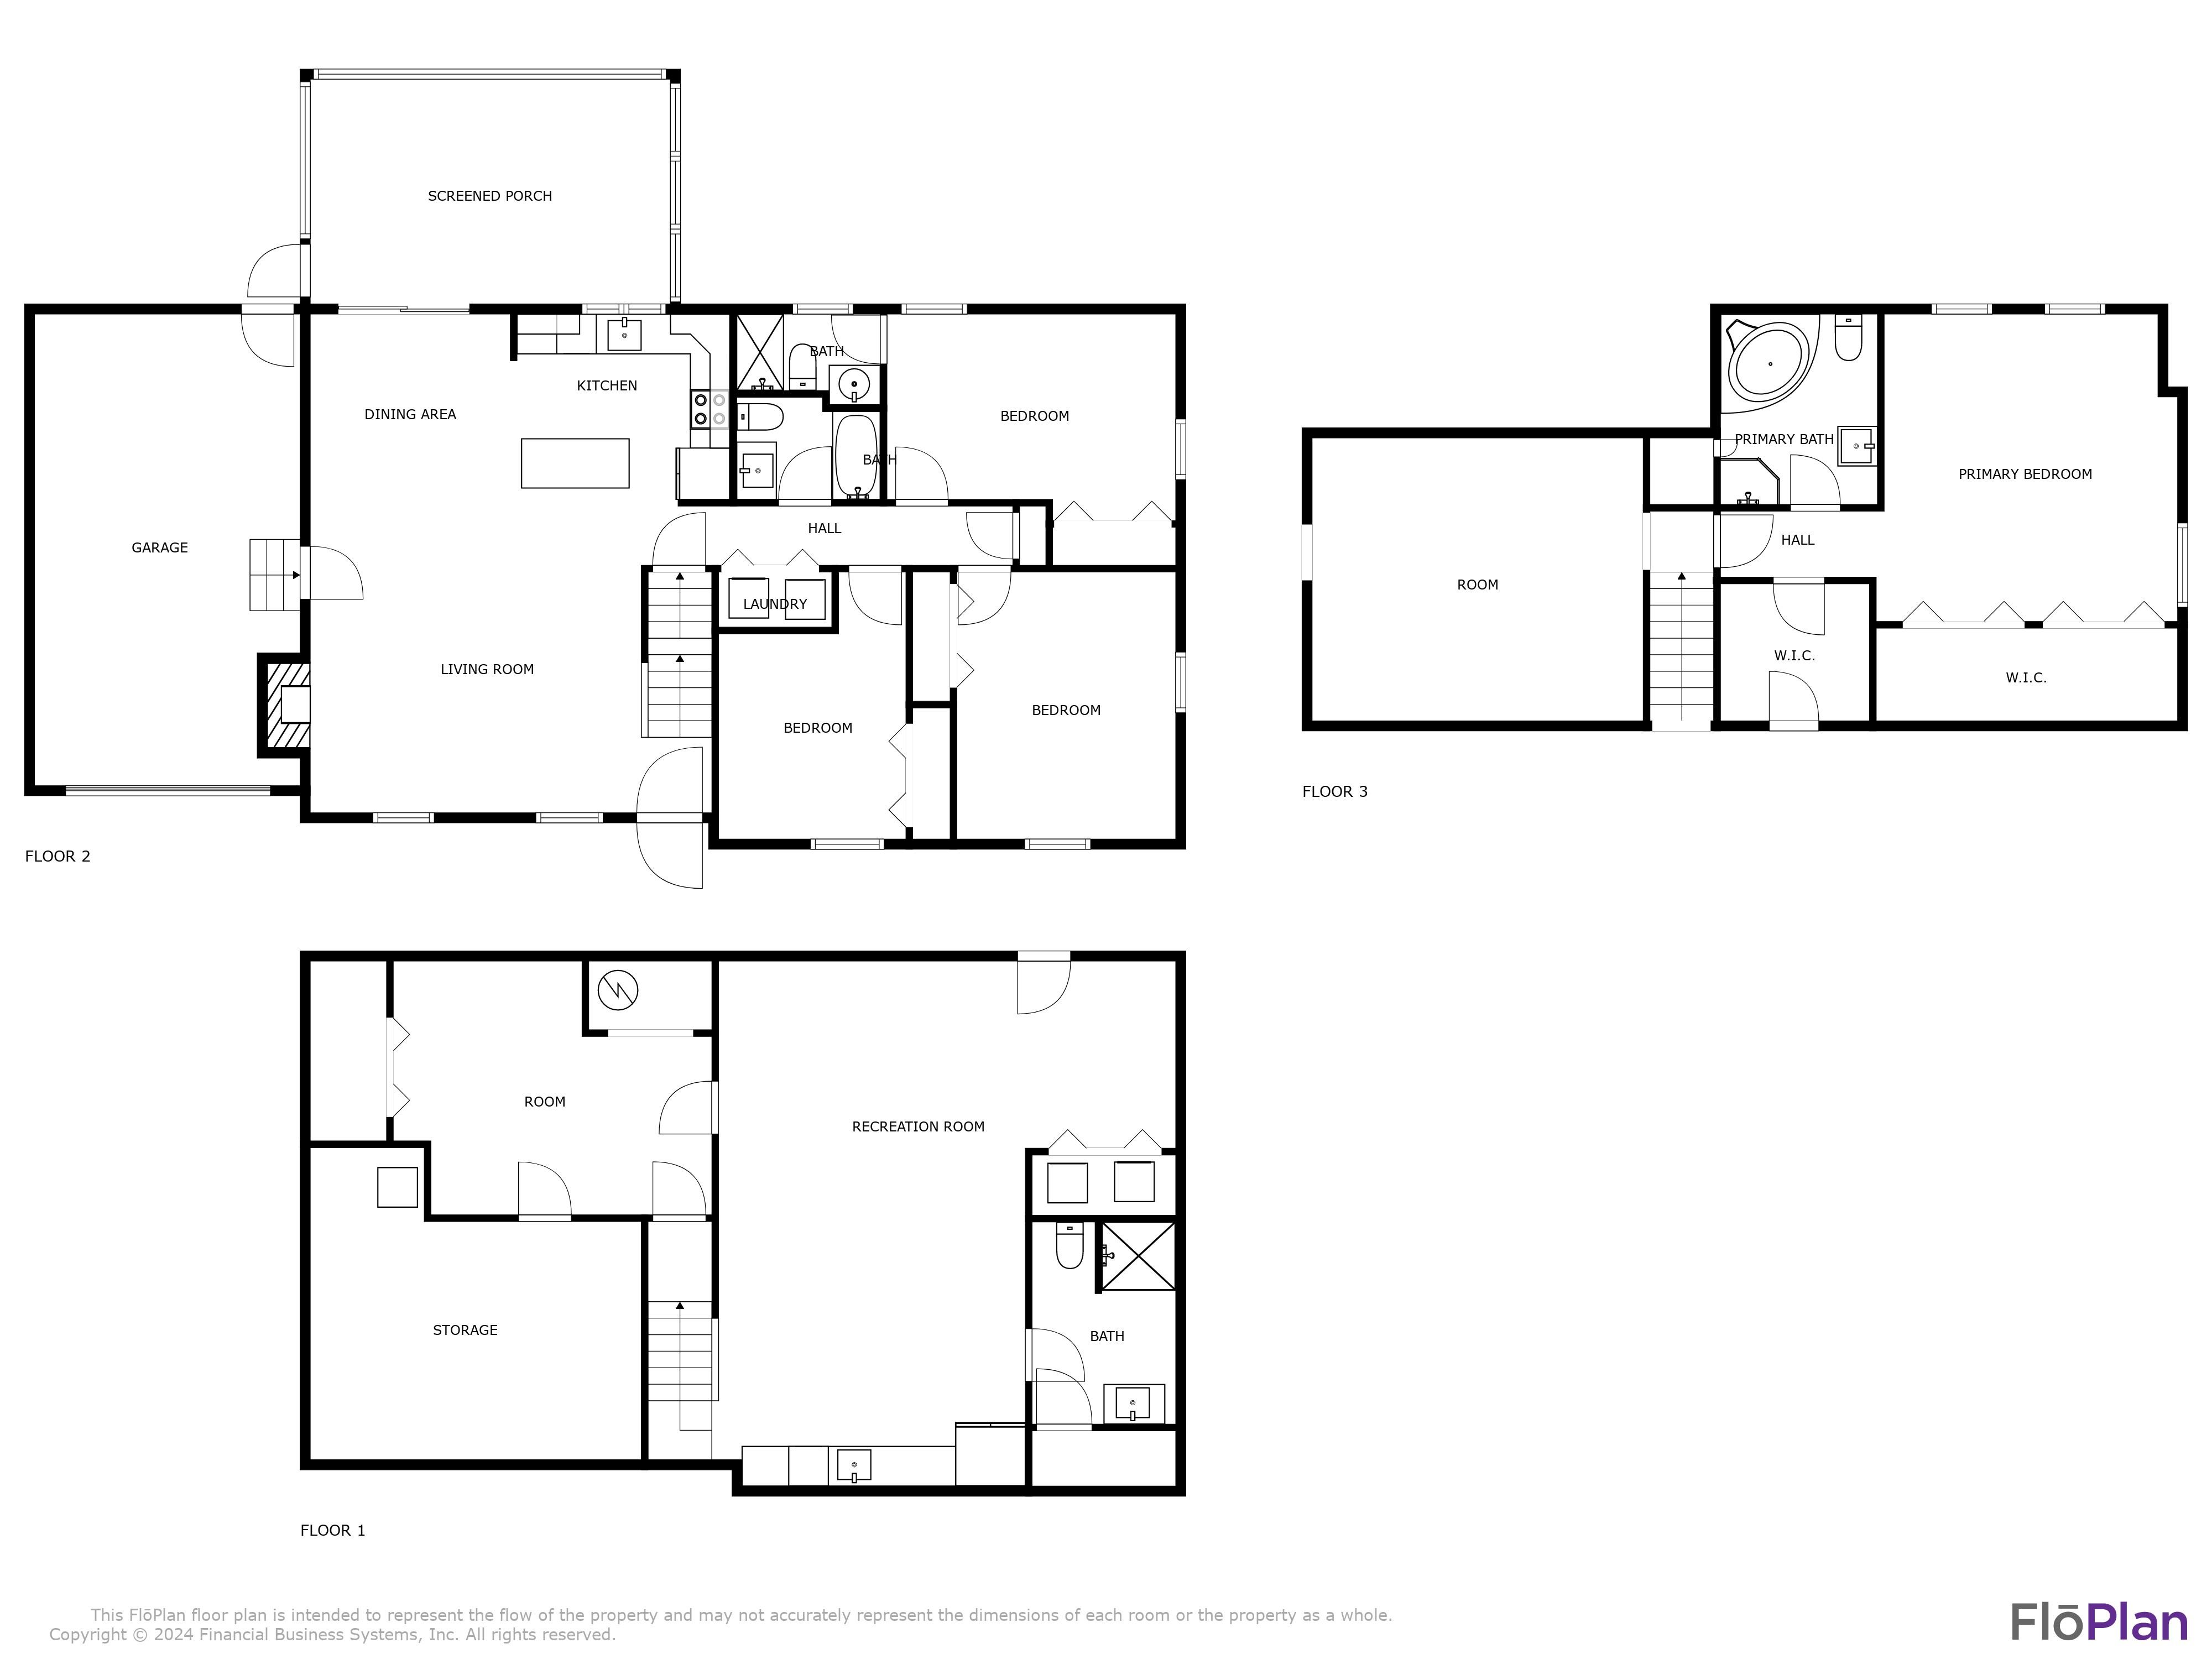 Property Image for 7 Welling Tree Drive